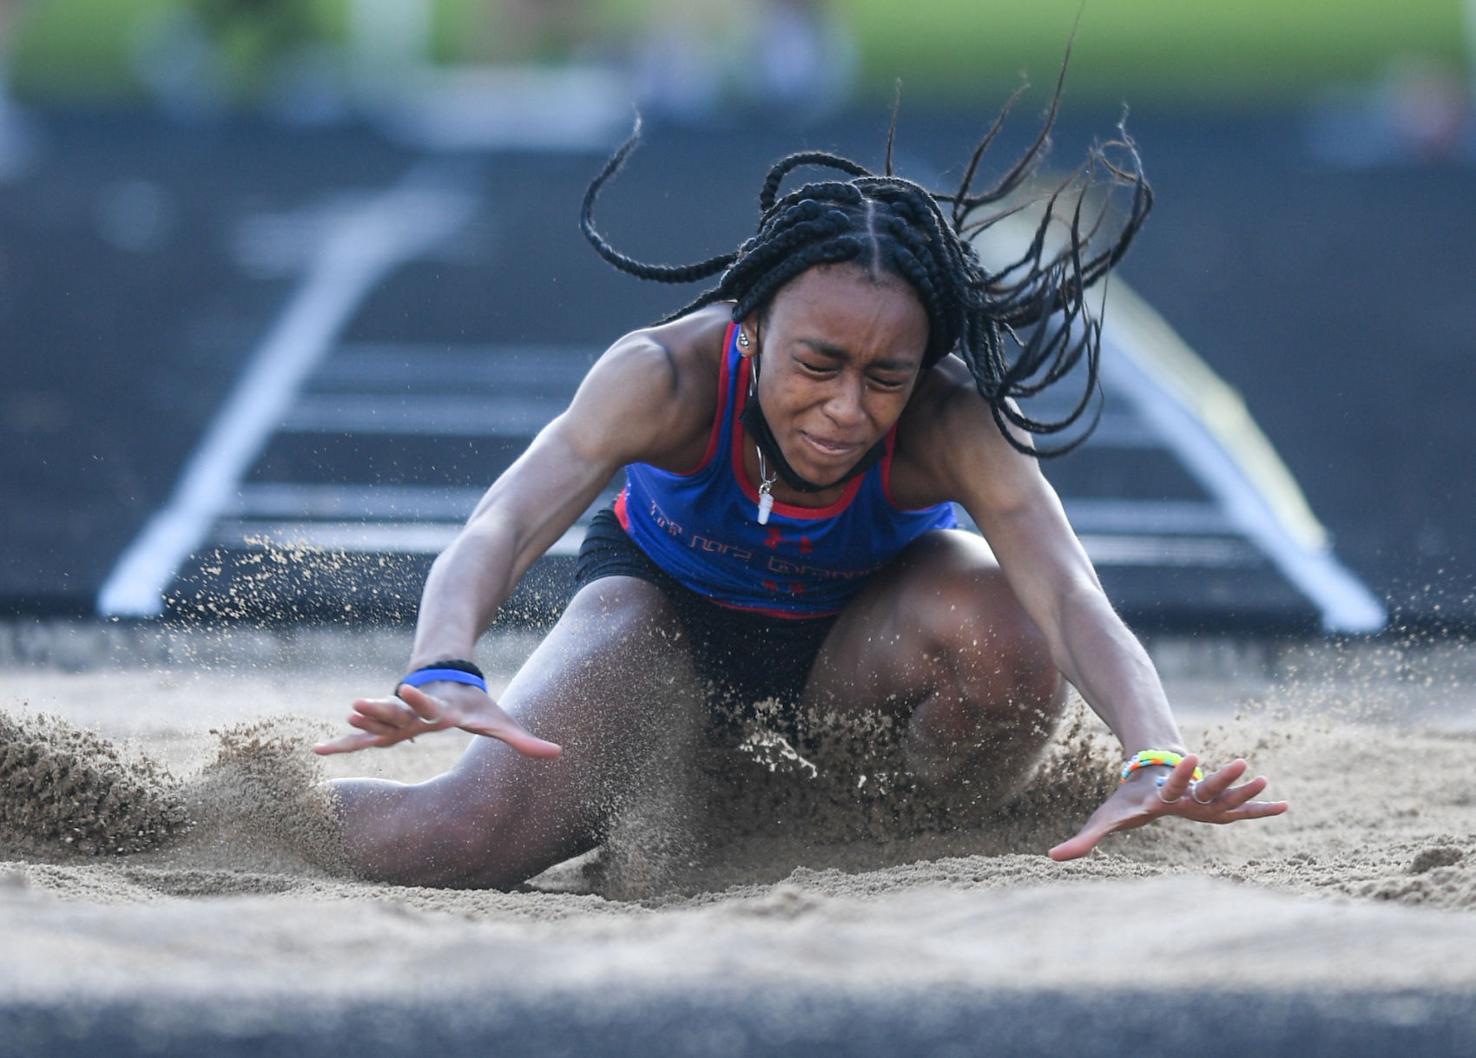 Photos Iowa Class 4a Coed State Qualifying Track Meet At